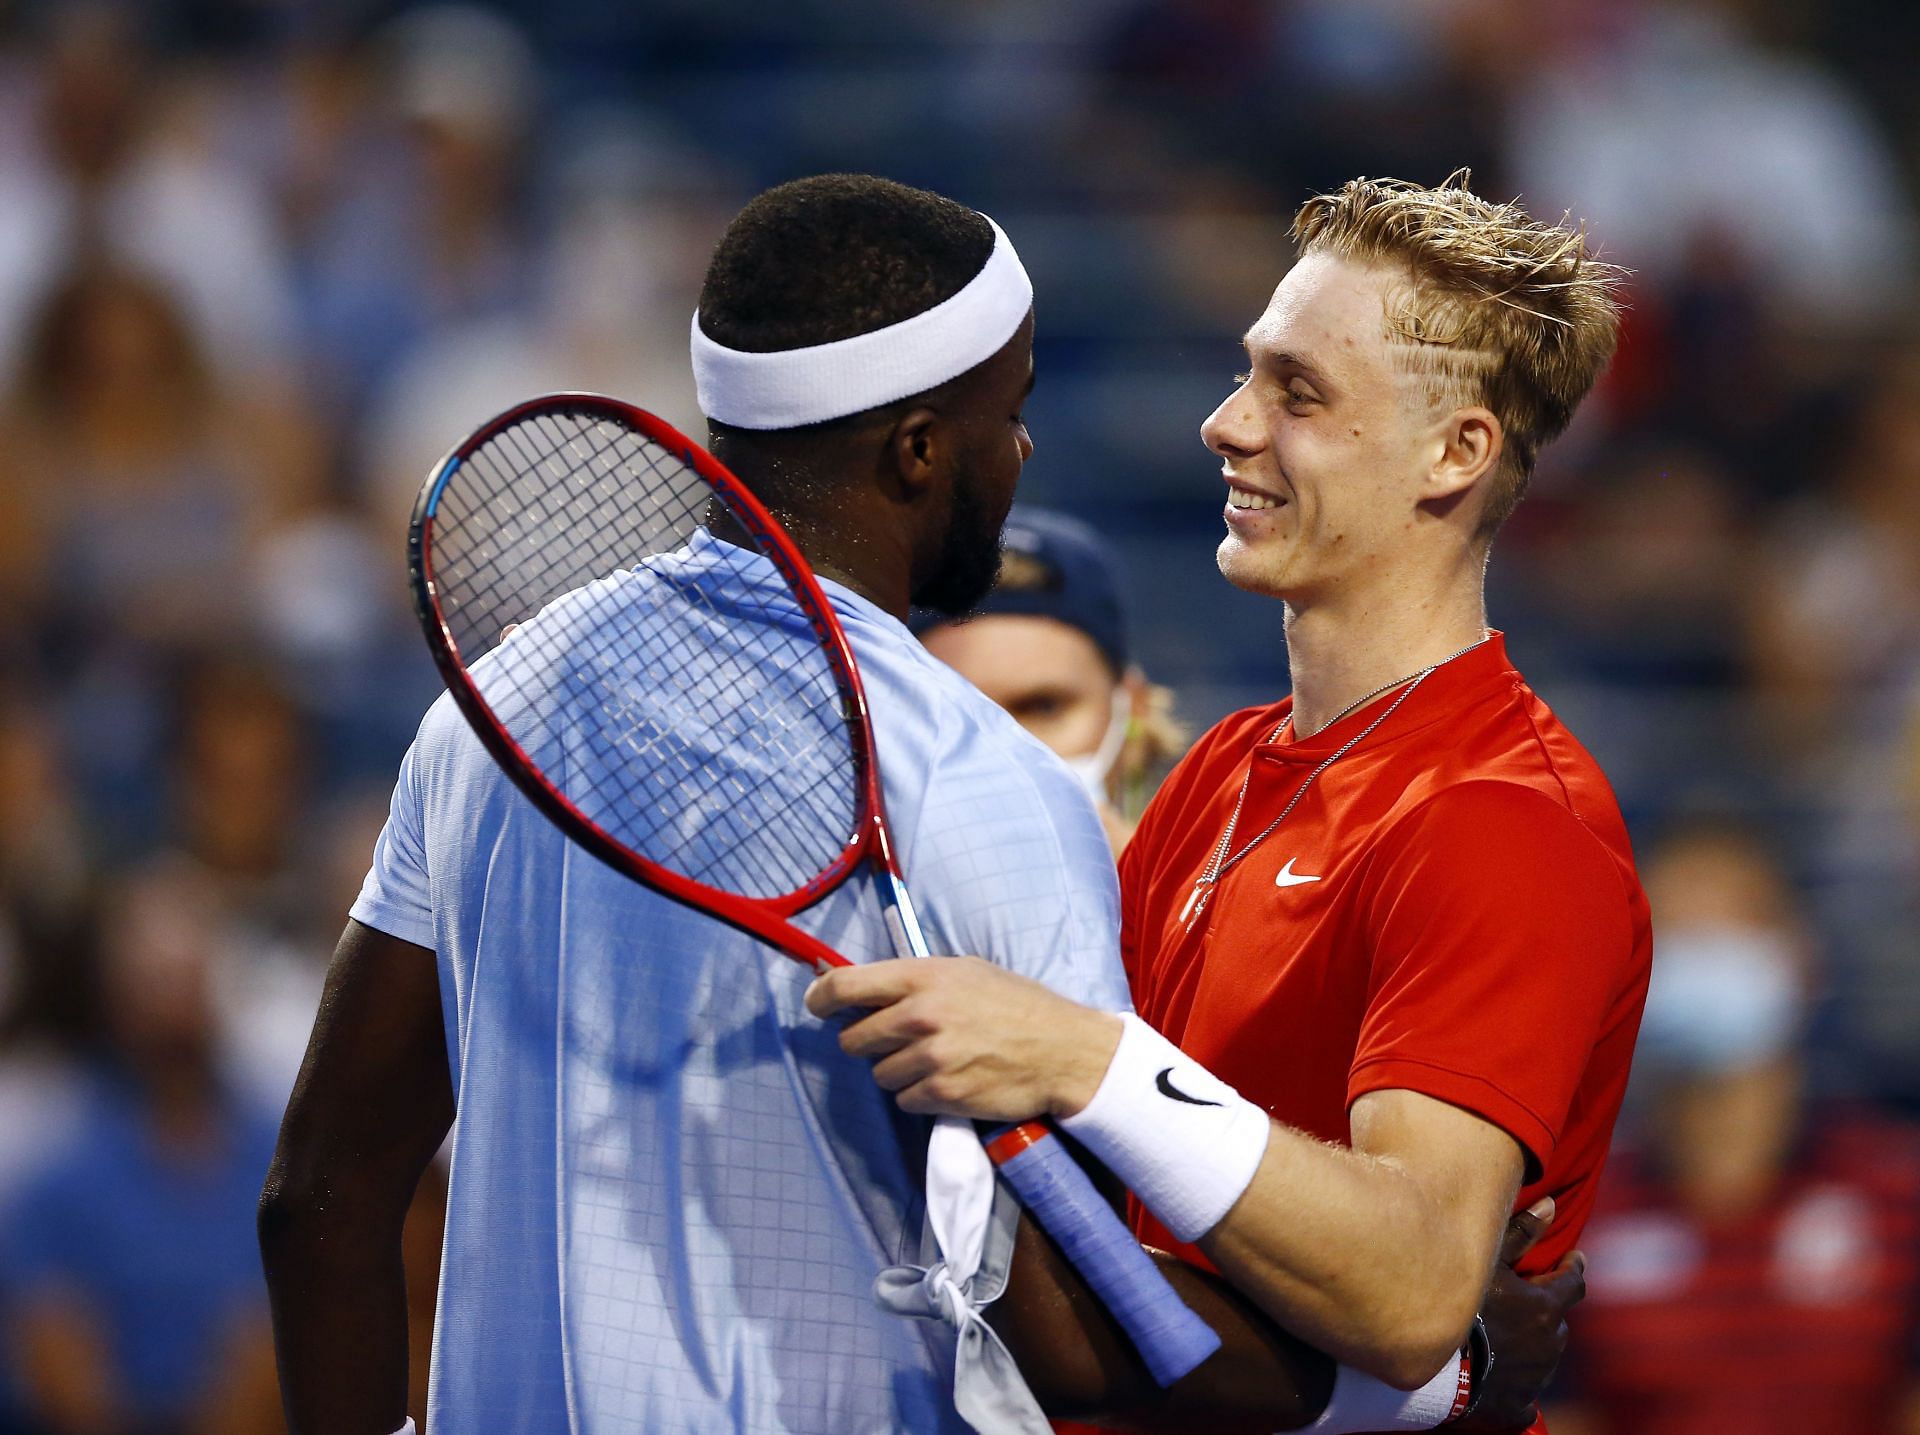 Frances Tiafoe (L) and Denis Shapovalov (R) at the 2021 National Bank Open in Toronto